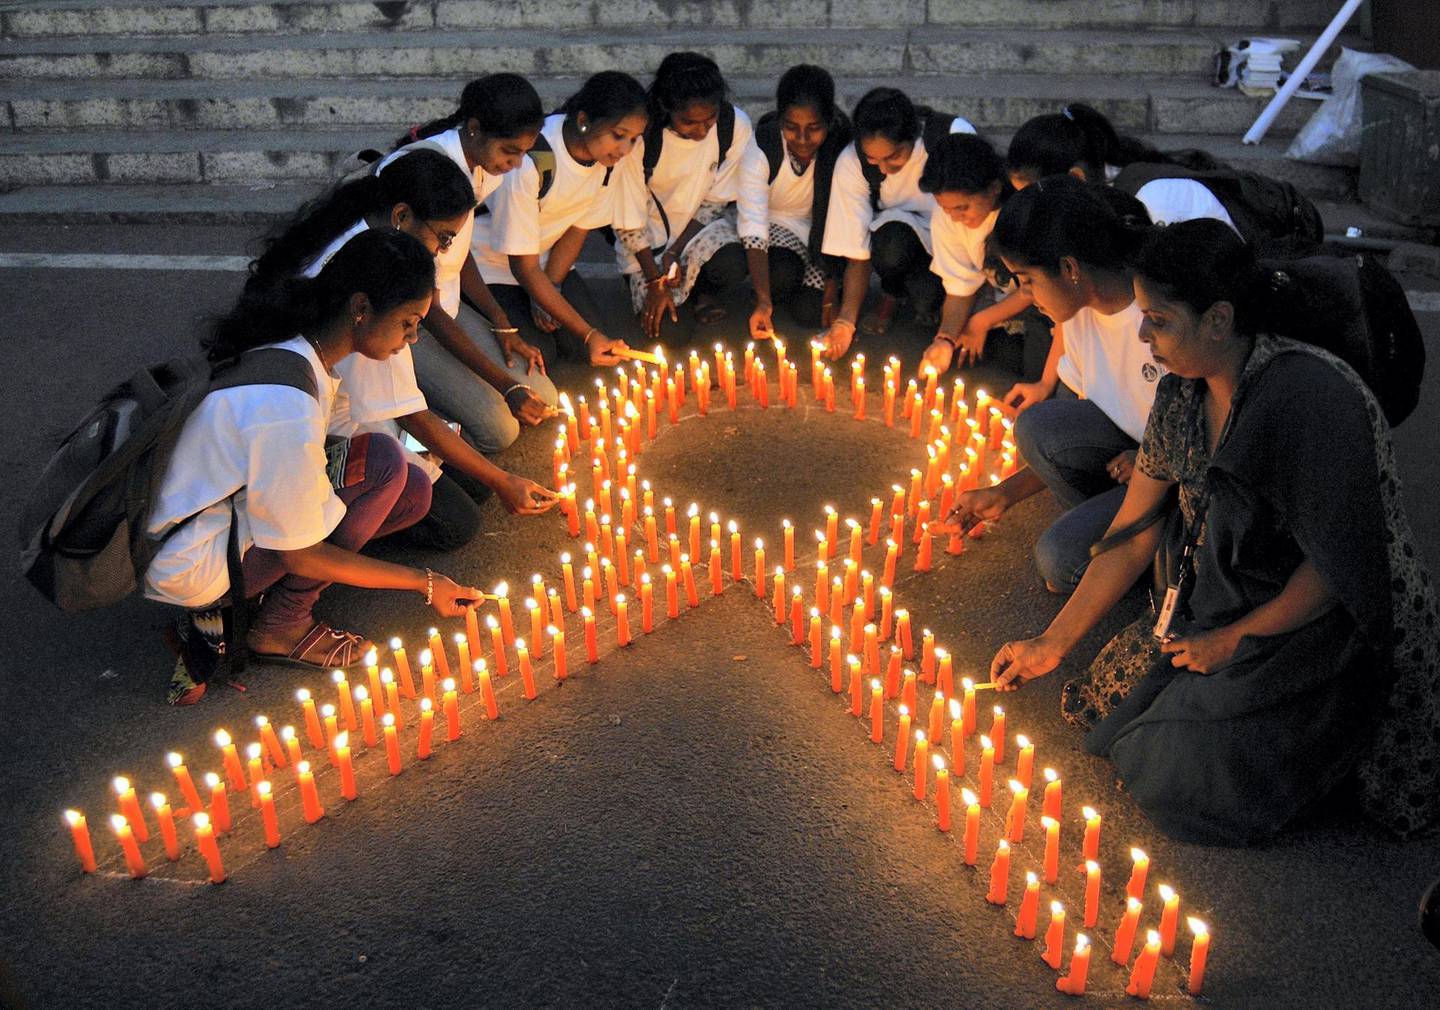 Staff members of a government-run pharmaceutical college light candles arranged in the formation of a ribbon to promote cancer awareness and mark World Cancer Day, in the southern Indian city of Bengaluru, formerly known as Bangalore, February 4, 2015. REUTERS/Abhishek N. Chinnappa (INDIA - Tags: HEALTH SOCIETY ANNIVERSARY)